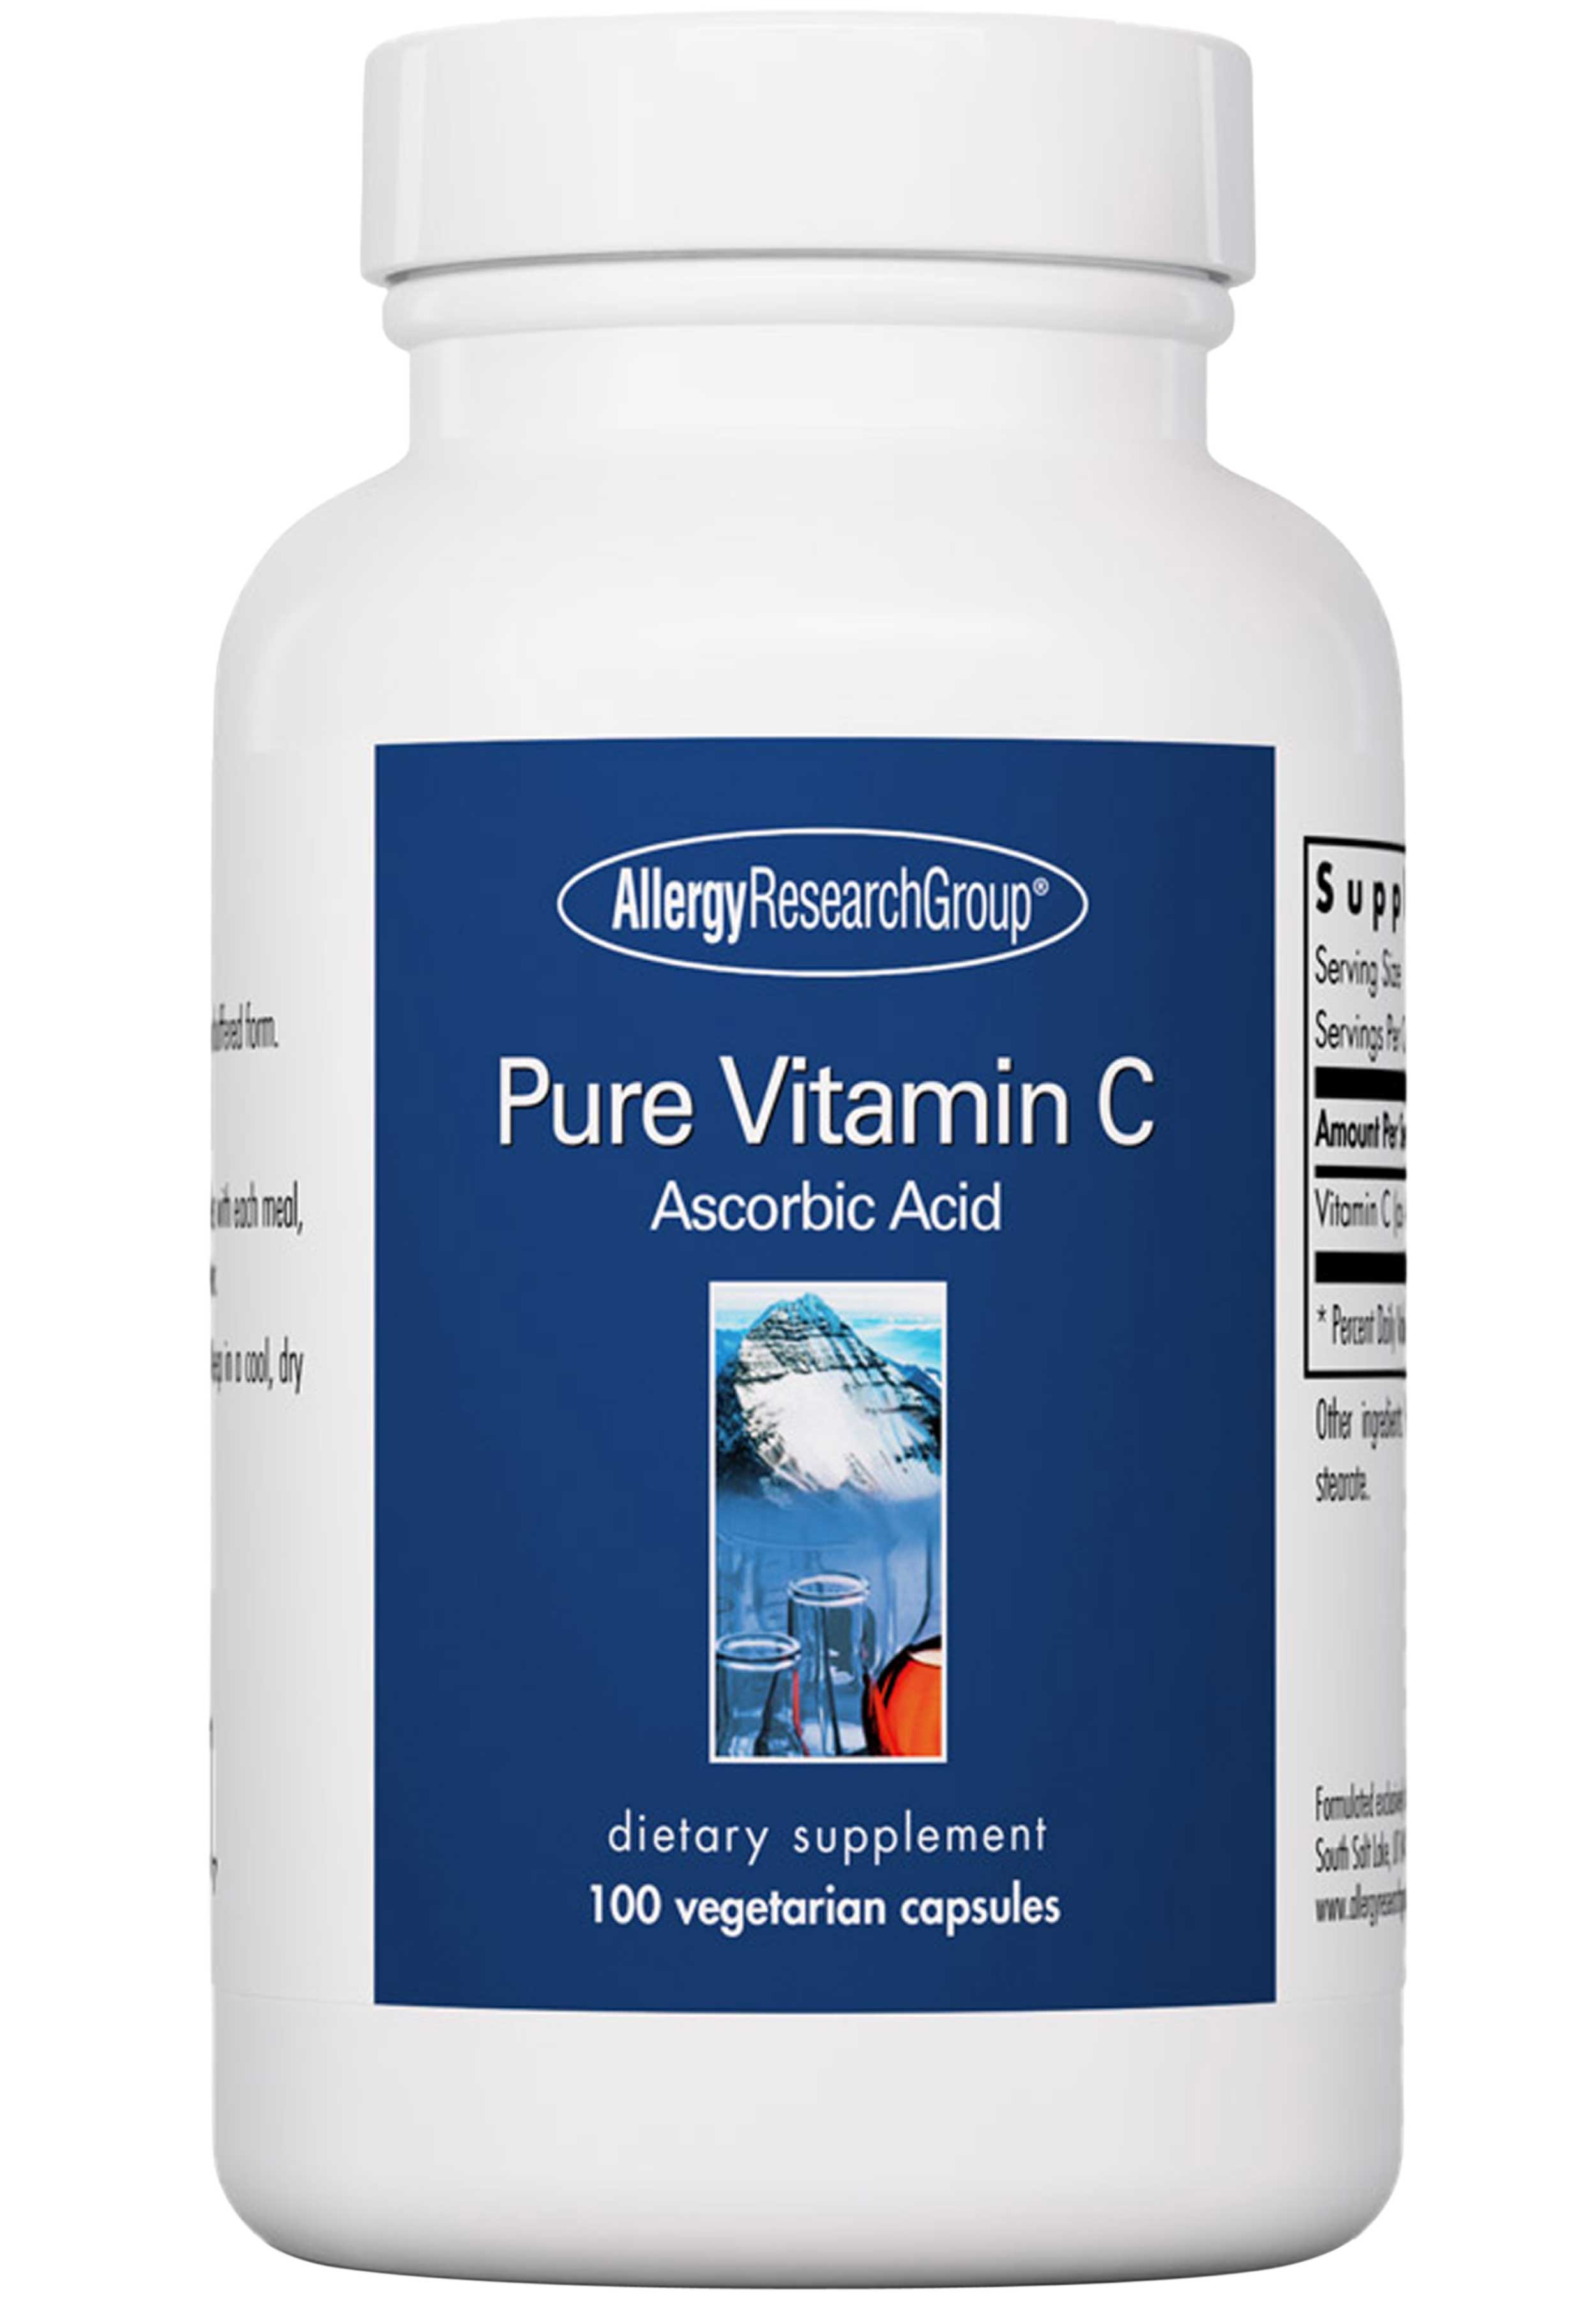 Allergy Research Group Pure Vitamin C